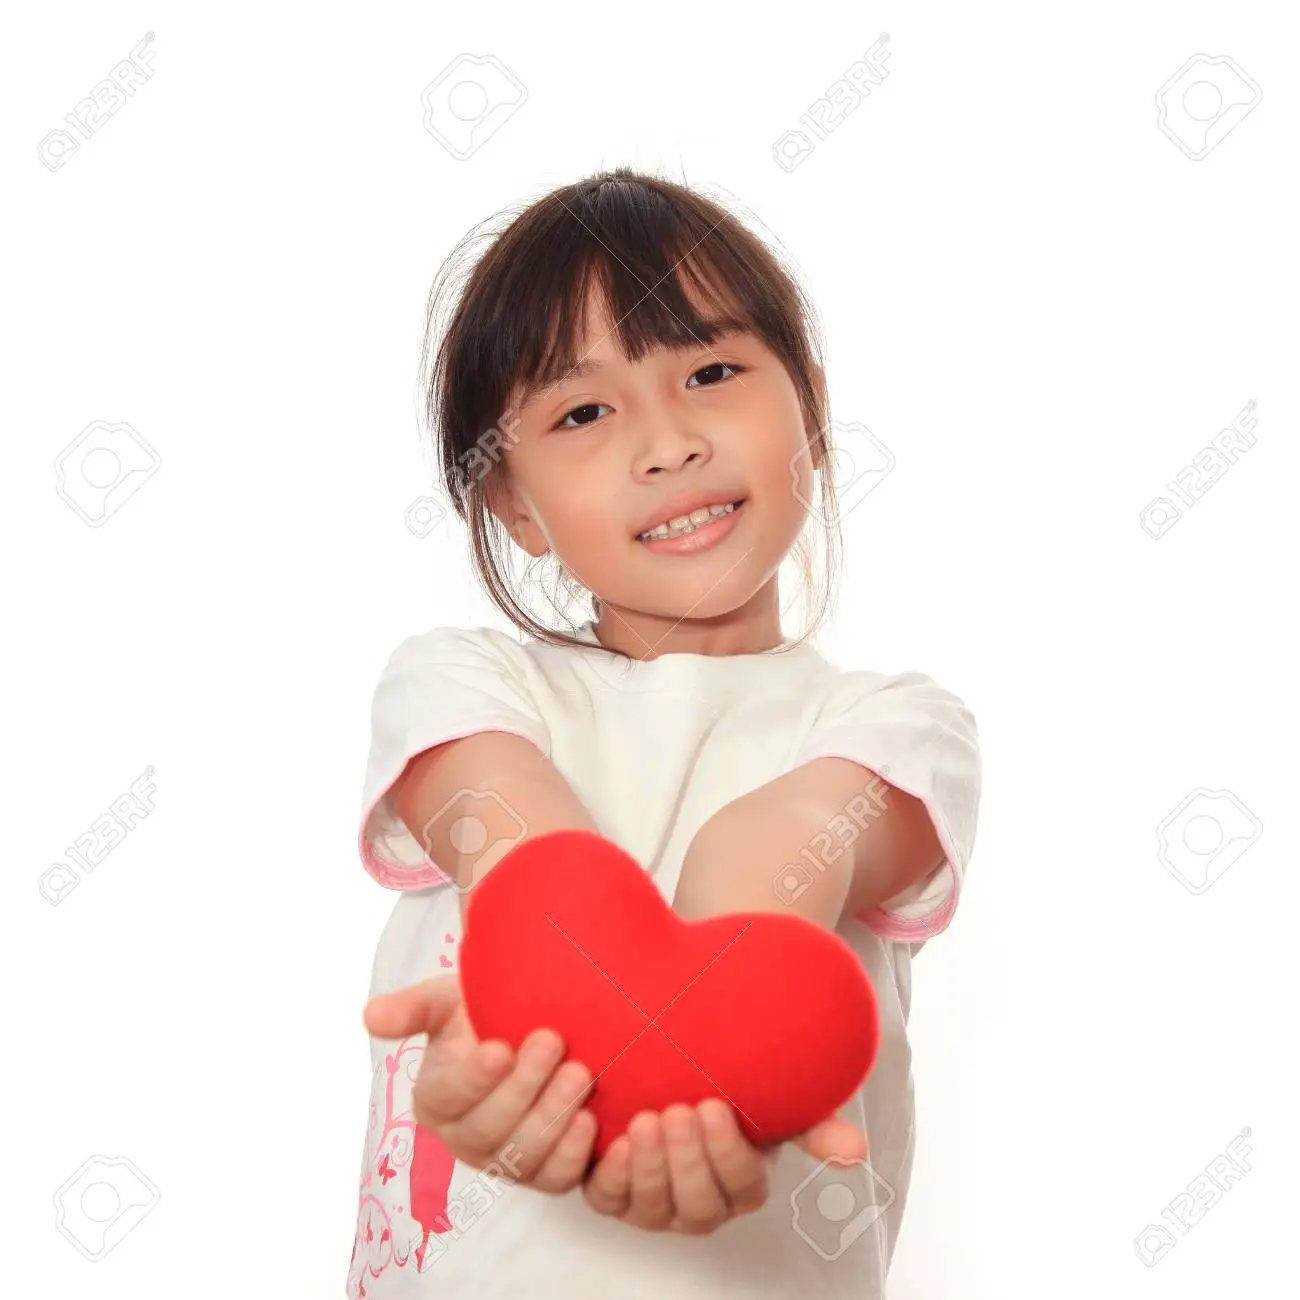 Asian cute girl giving symbol of red heart for you stock photo picture and royalty free image image